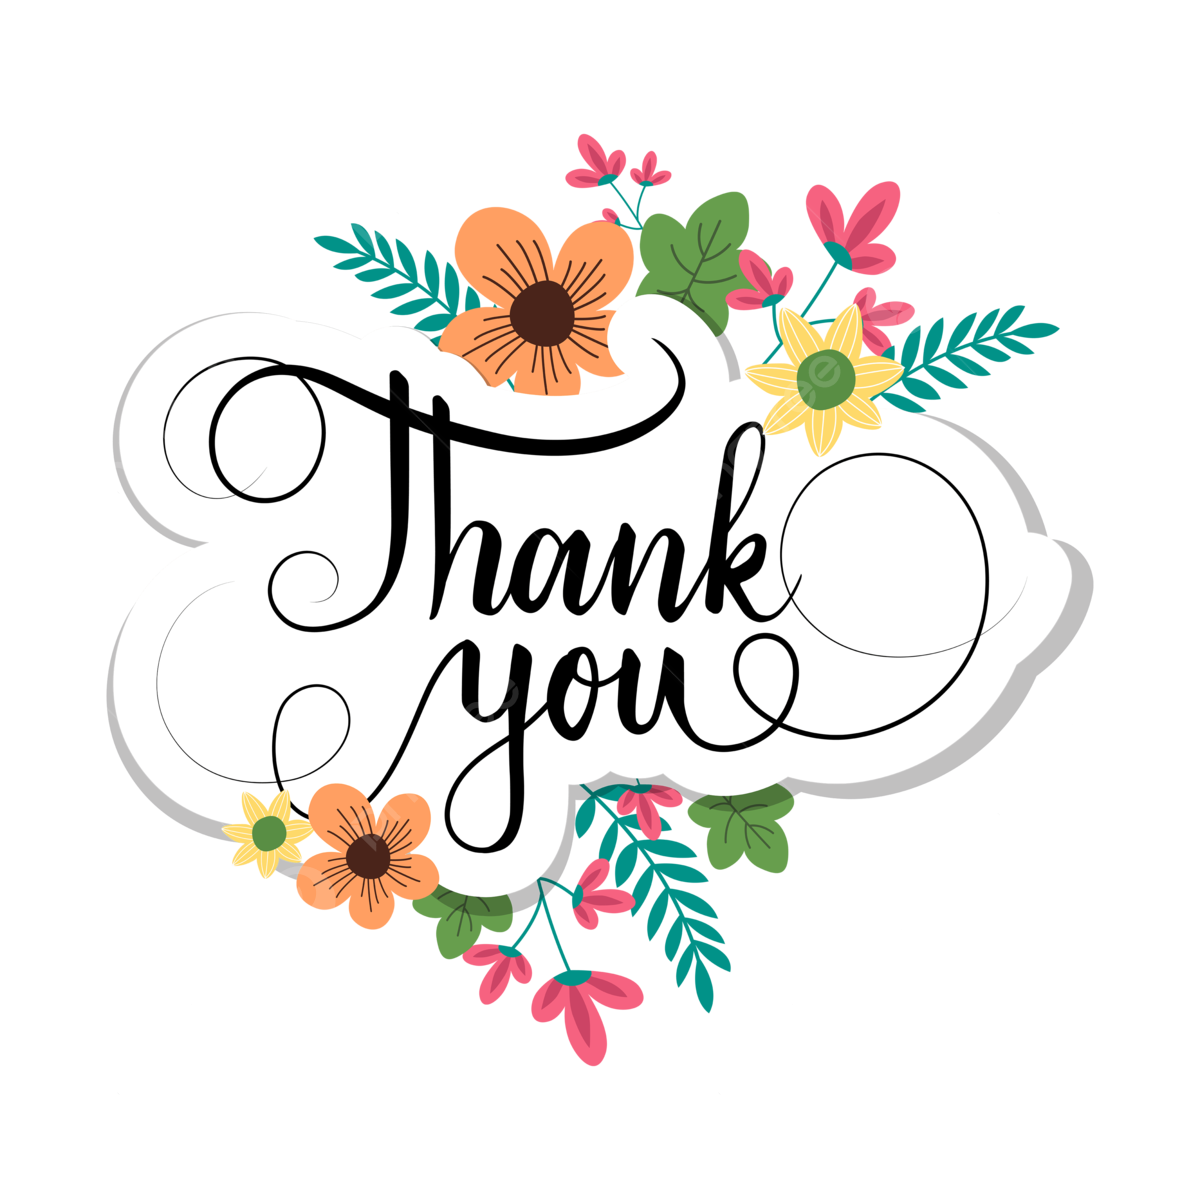 pngtree-thank-you-text-decorated-by-floral-ornaments-picture-image_8538603.png